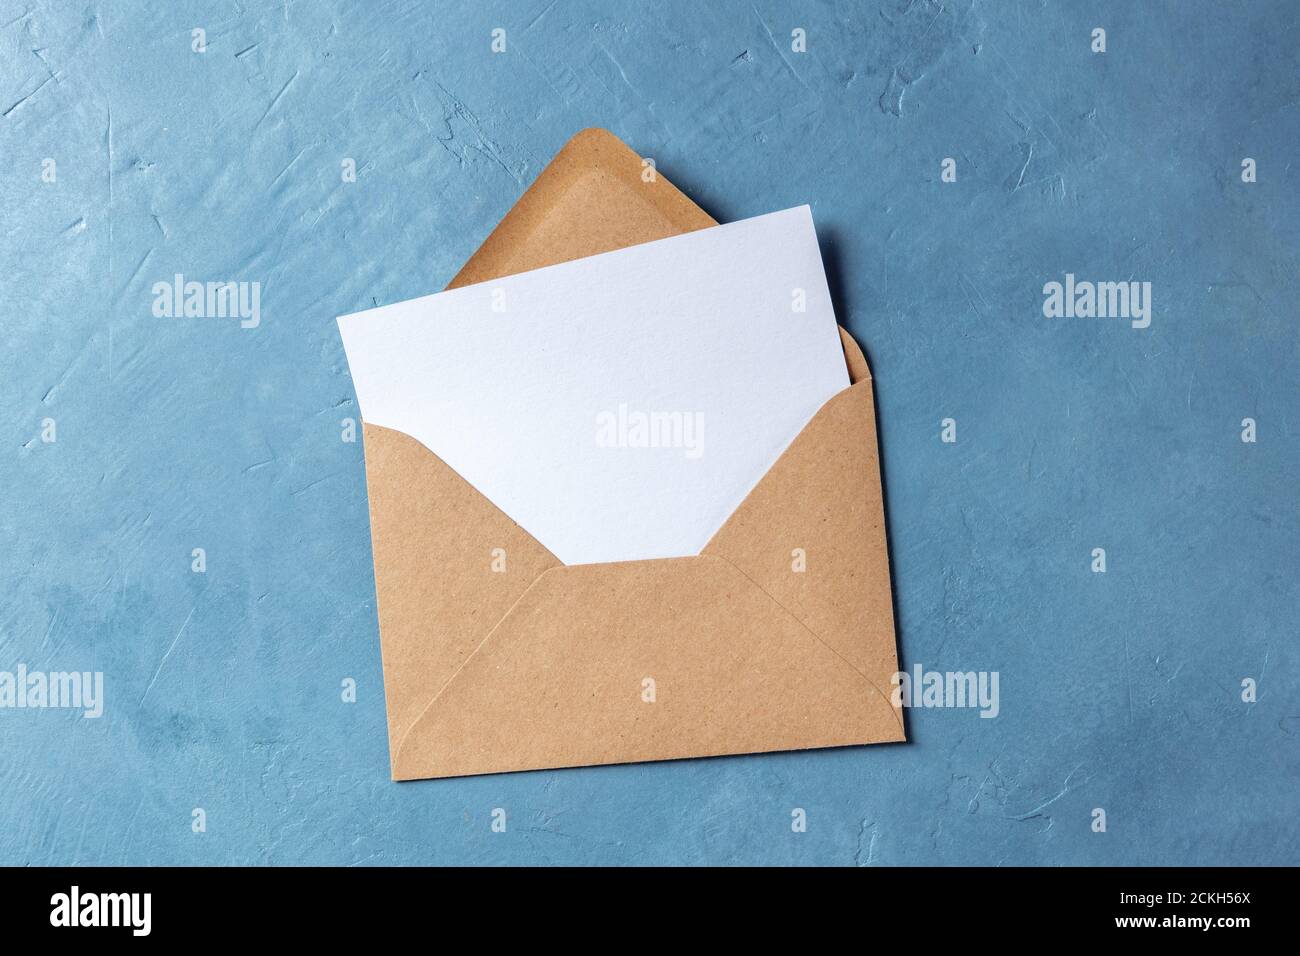 Autumn stationery mockup, overhead flat lay shot of a greeting card or invitation in a brown craft envelope on a blue background Stock Photo